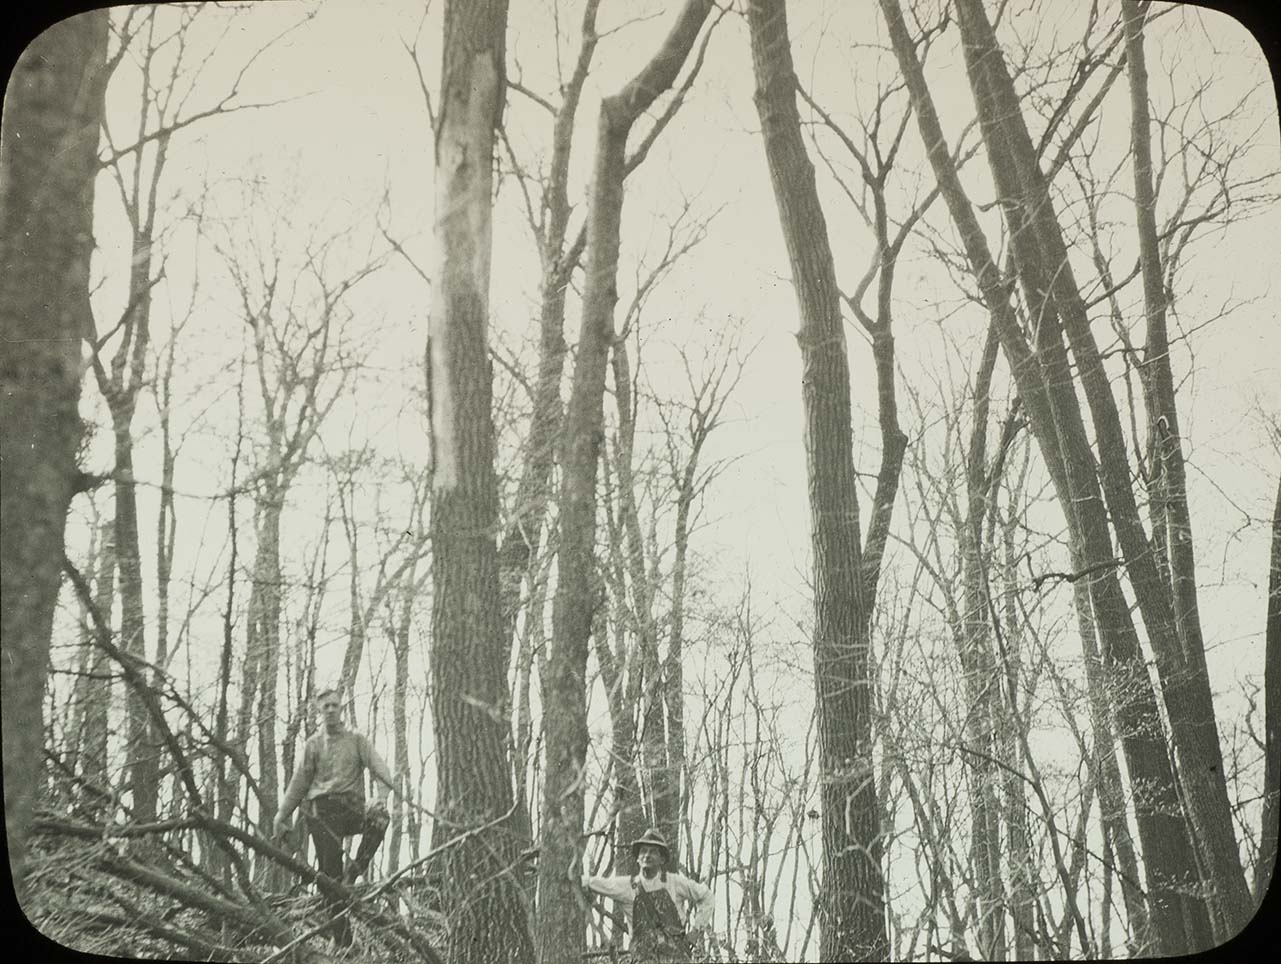 Lantern slide of two unidentified men standing in a wooded area